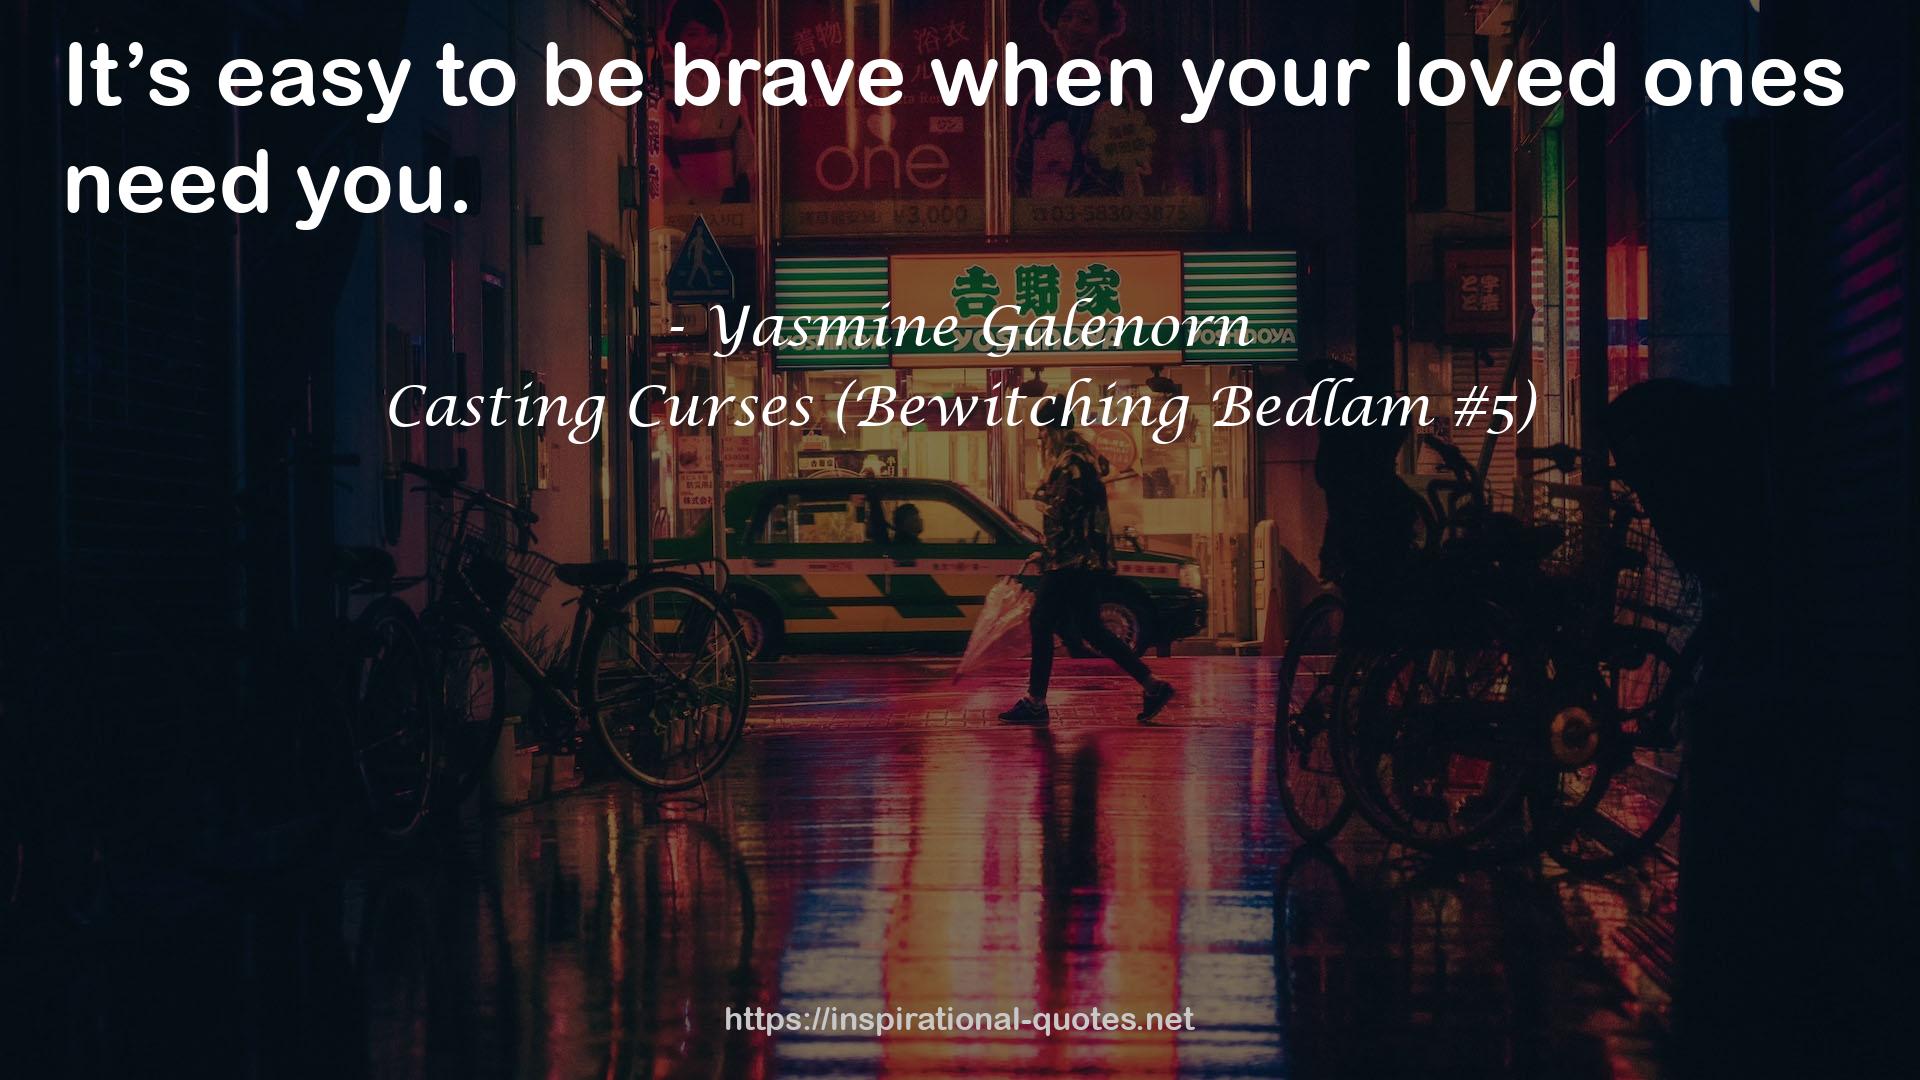 Casting Curses (Bewitching Bedlam #5) QUOTES